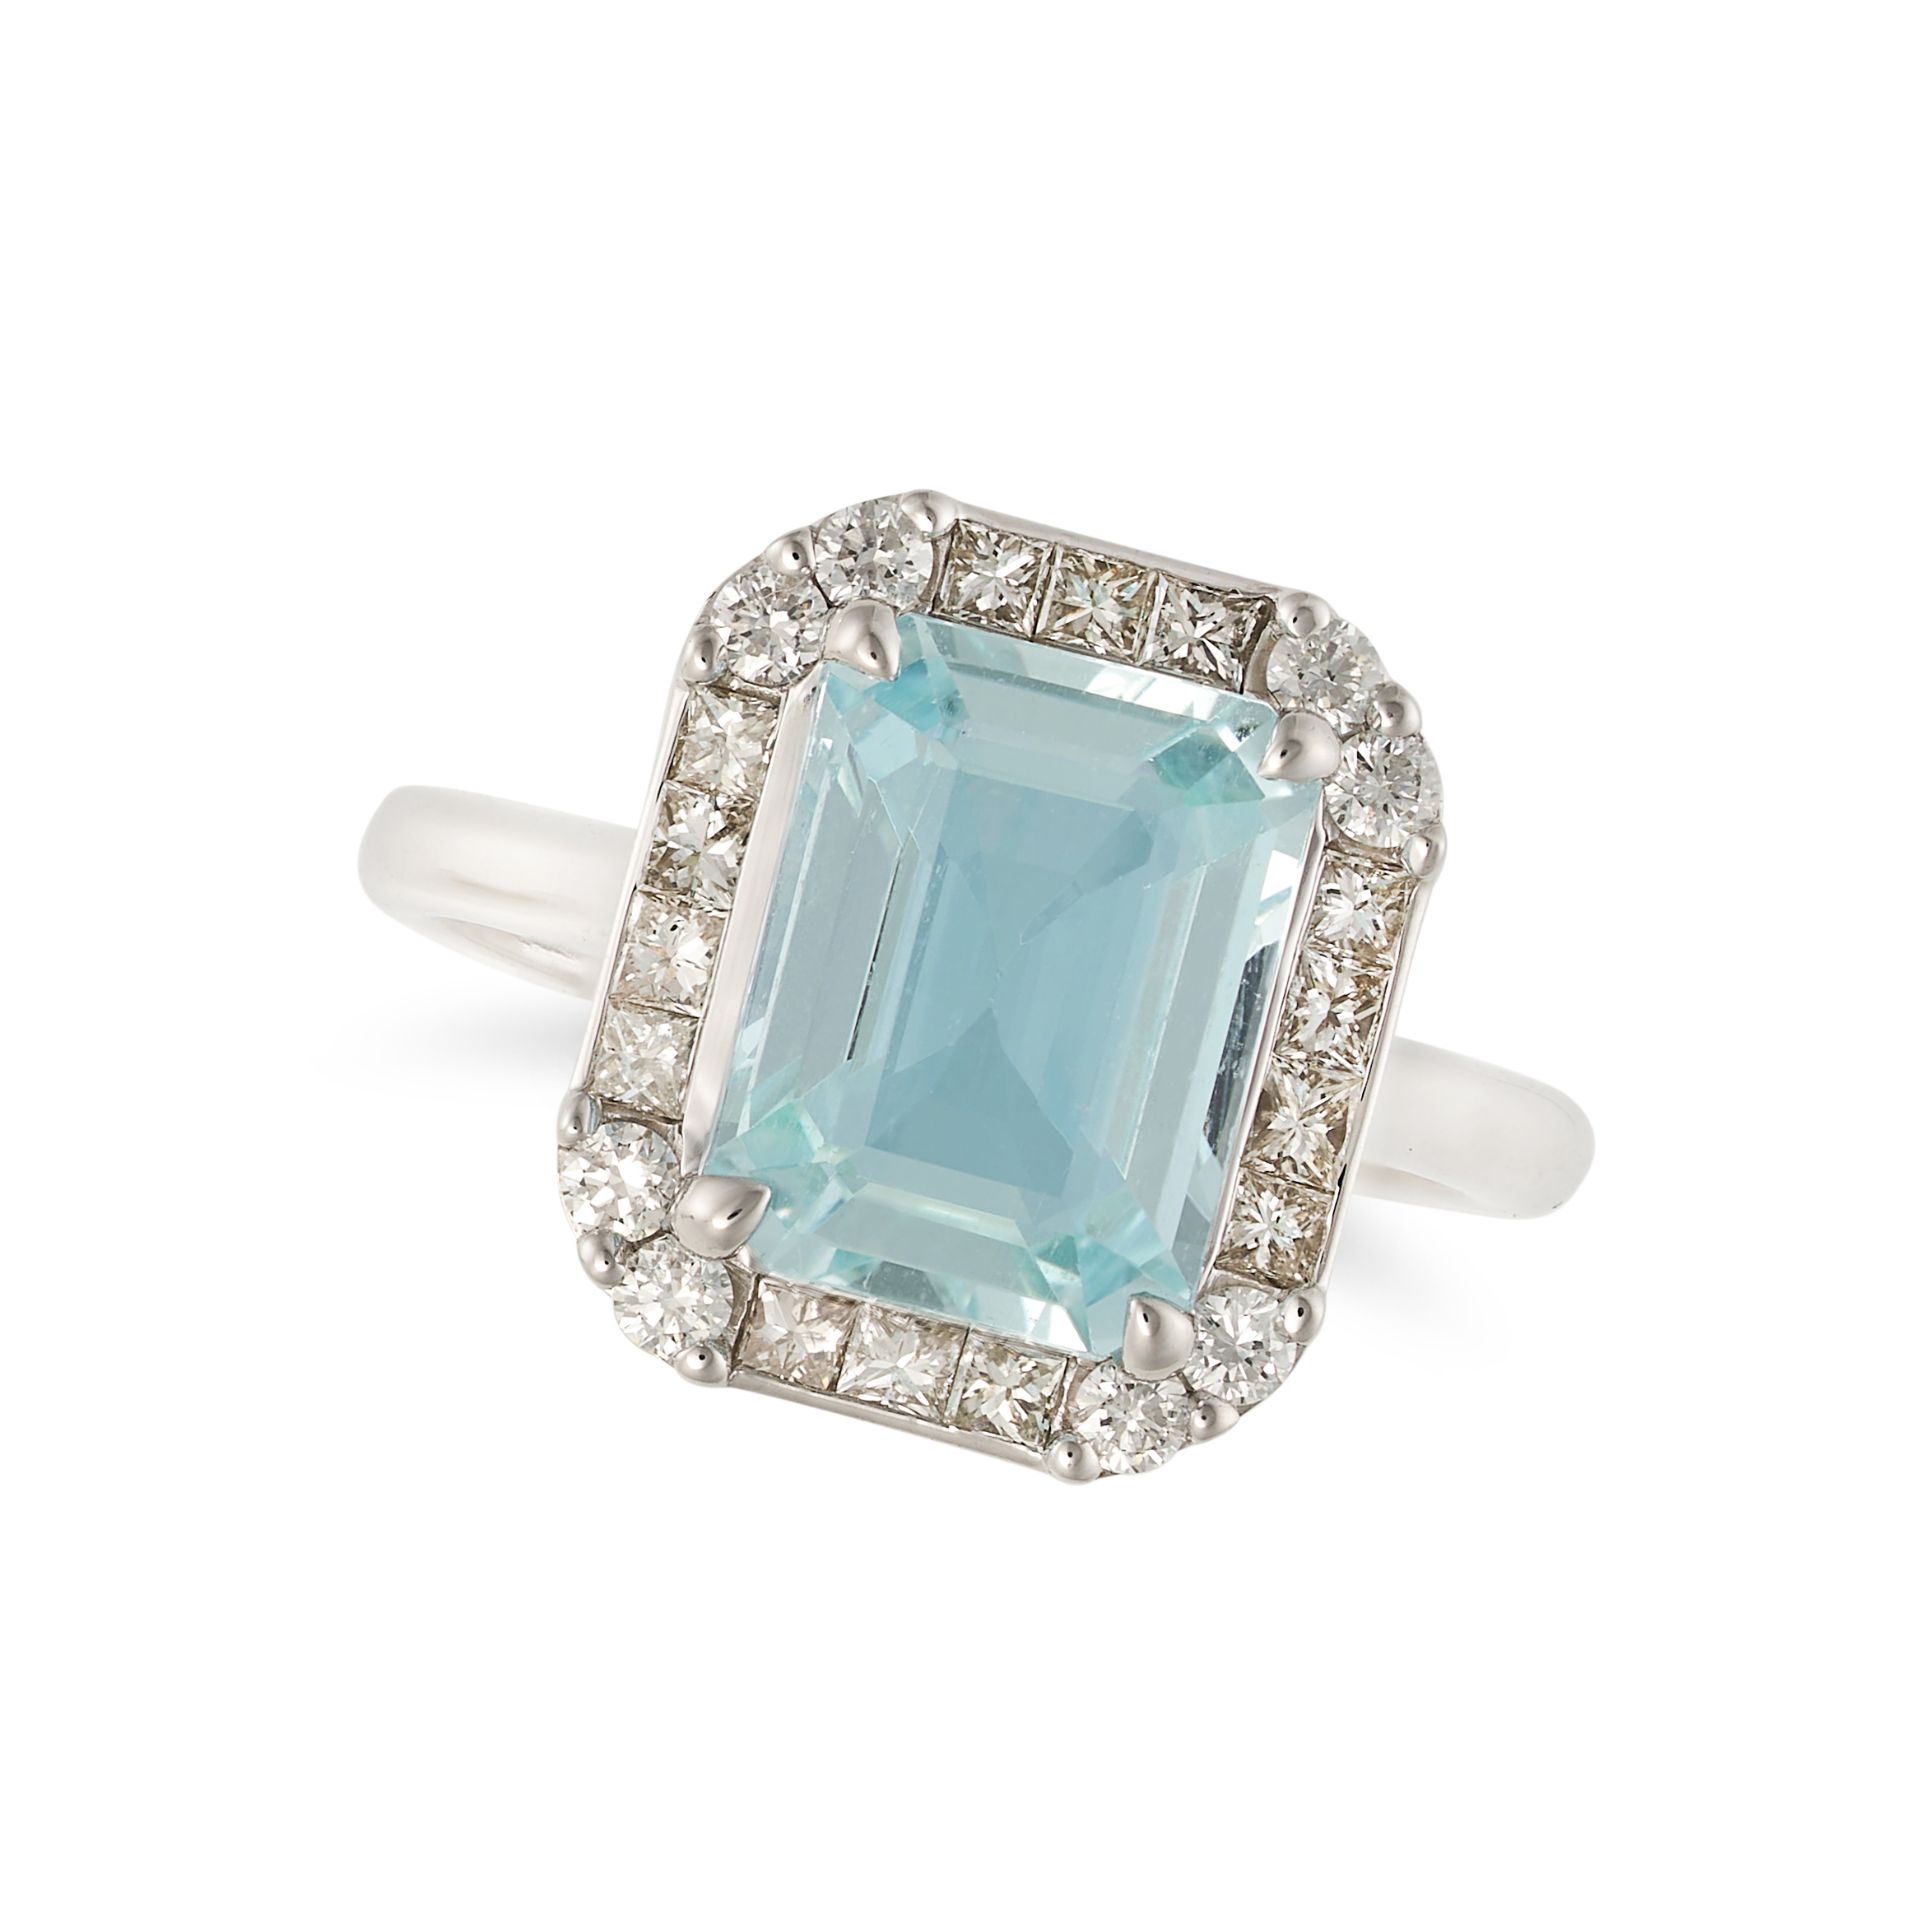 AN AQUAMARINE AND DIAMOND CLUSTER RING in 18ct white gold, set with an octagonal step cut aquamar...